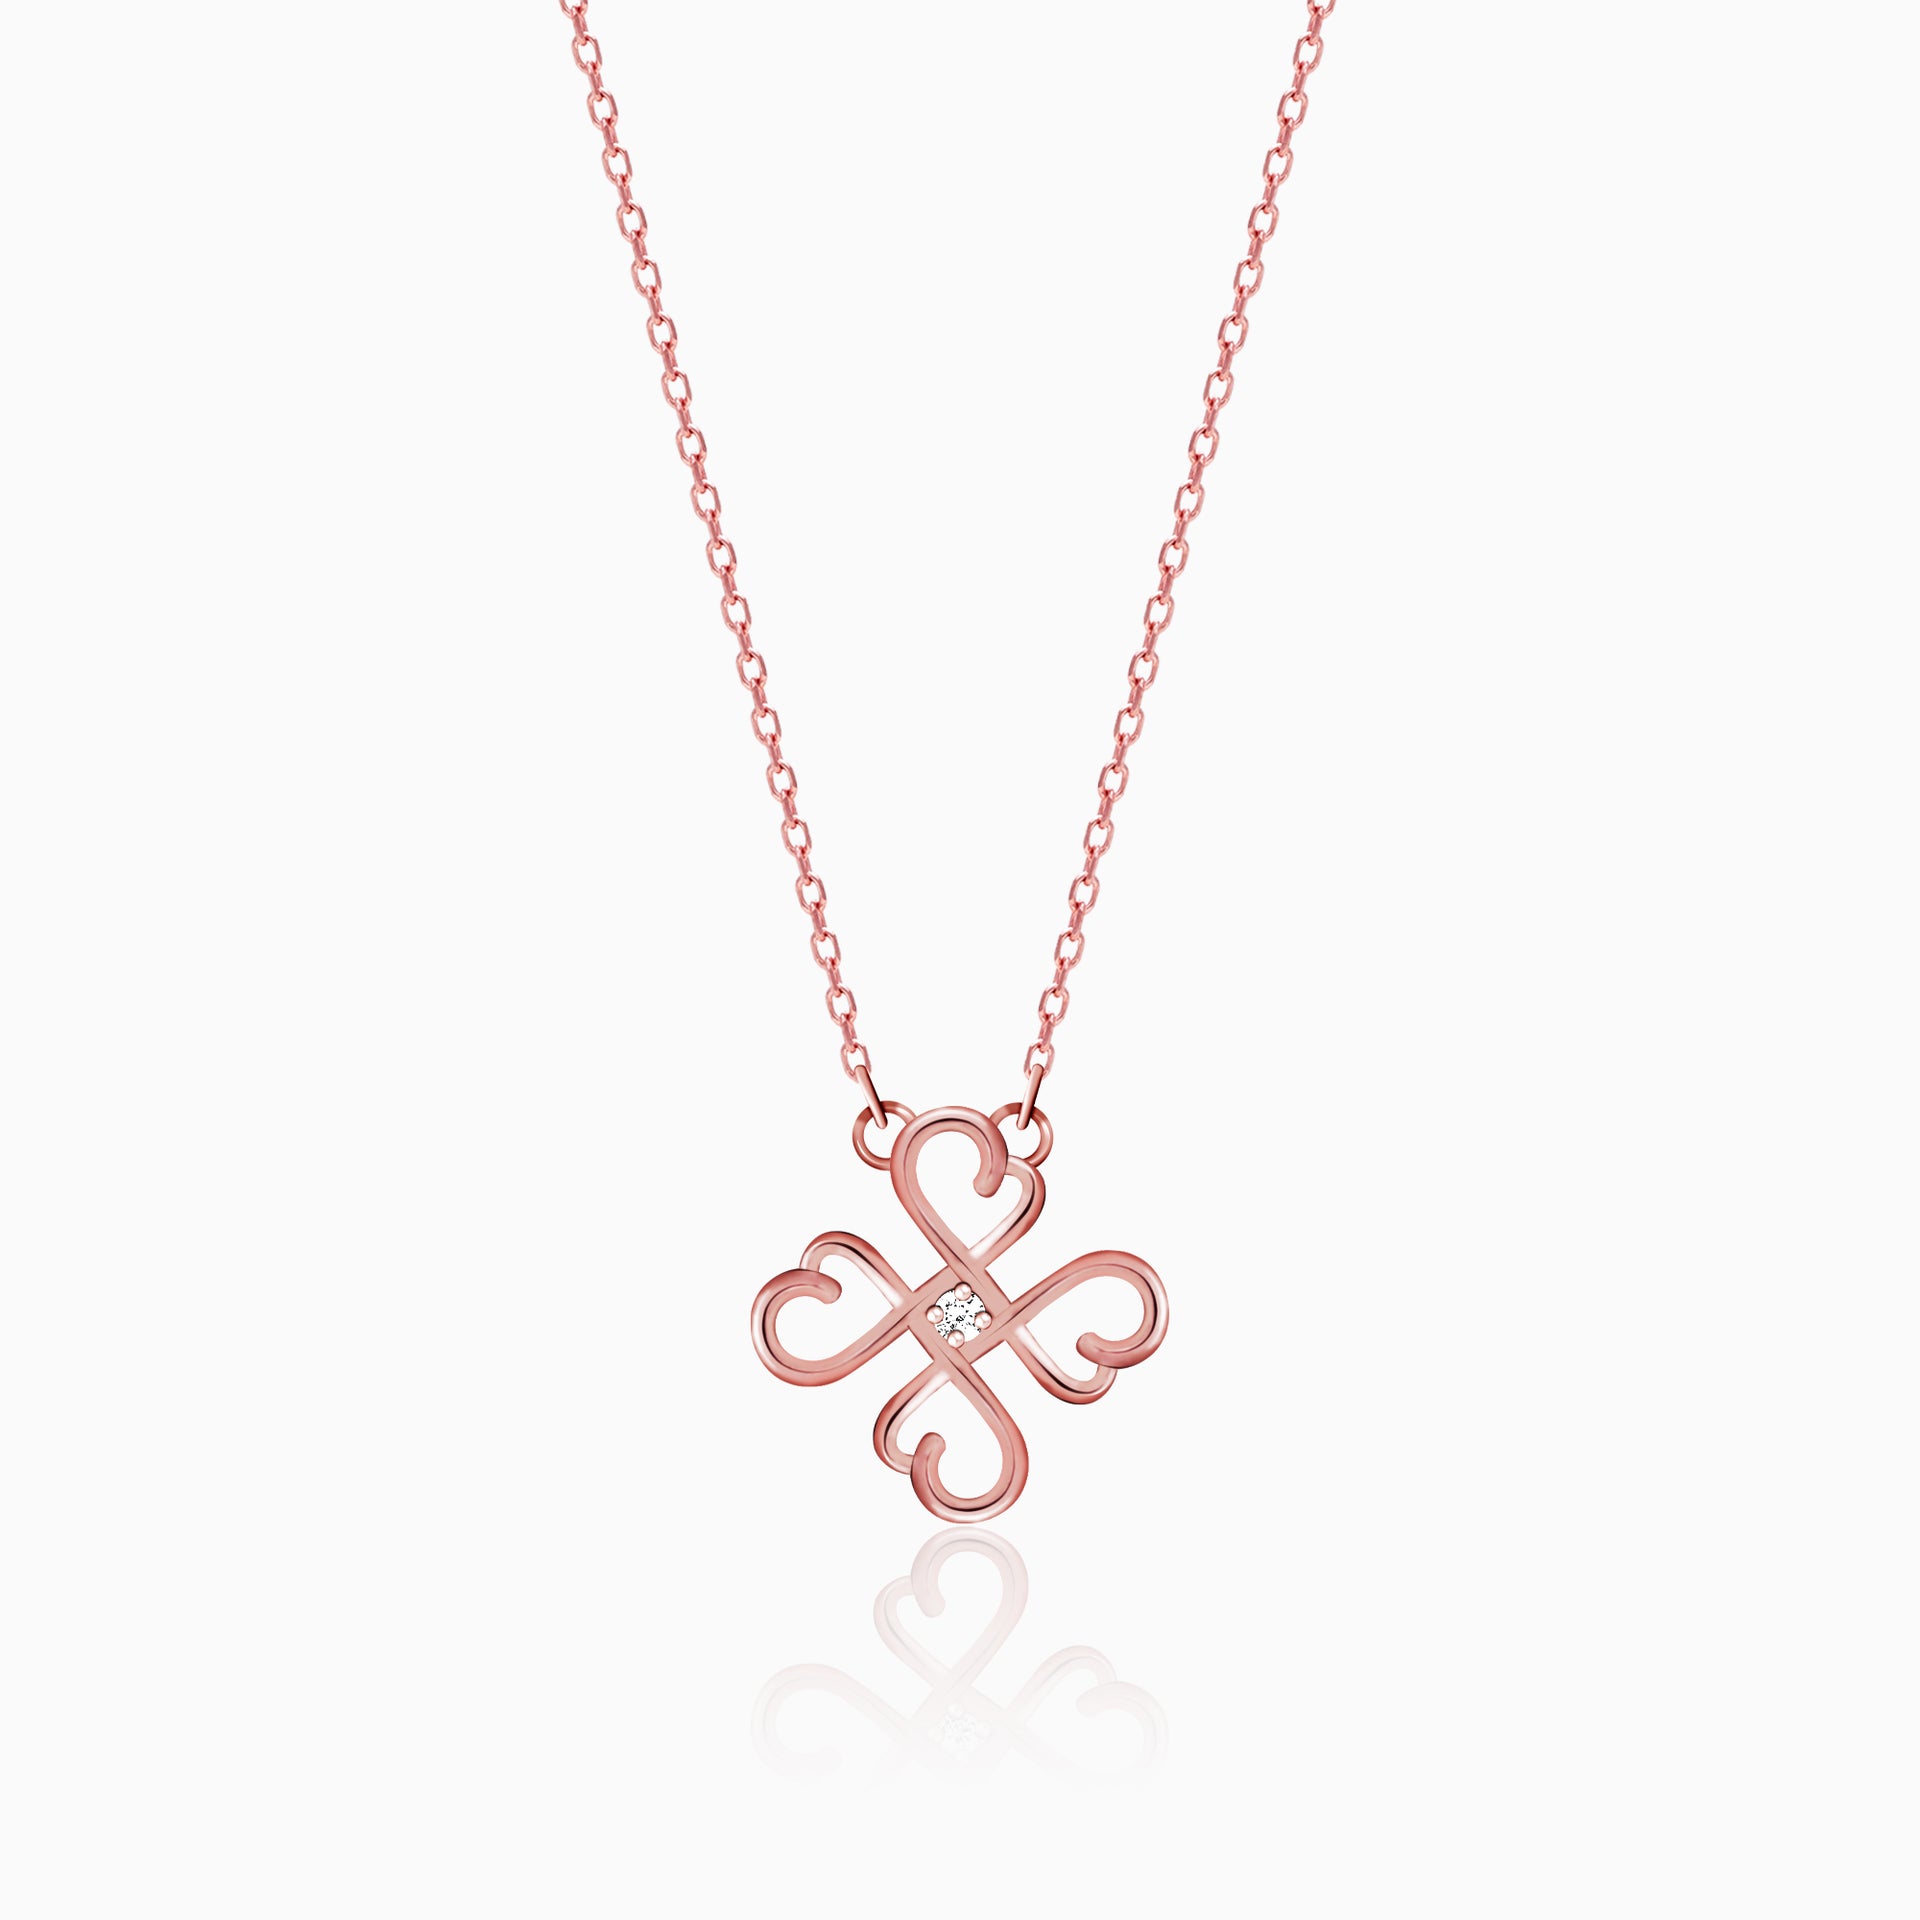 Lucky Clover Floral Charms Women's Necklace in Silver/ Rose Gold| Eunoia SELECTS Gold / White